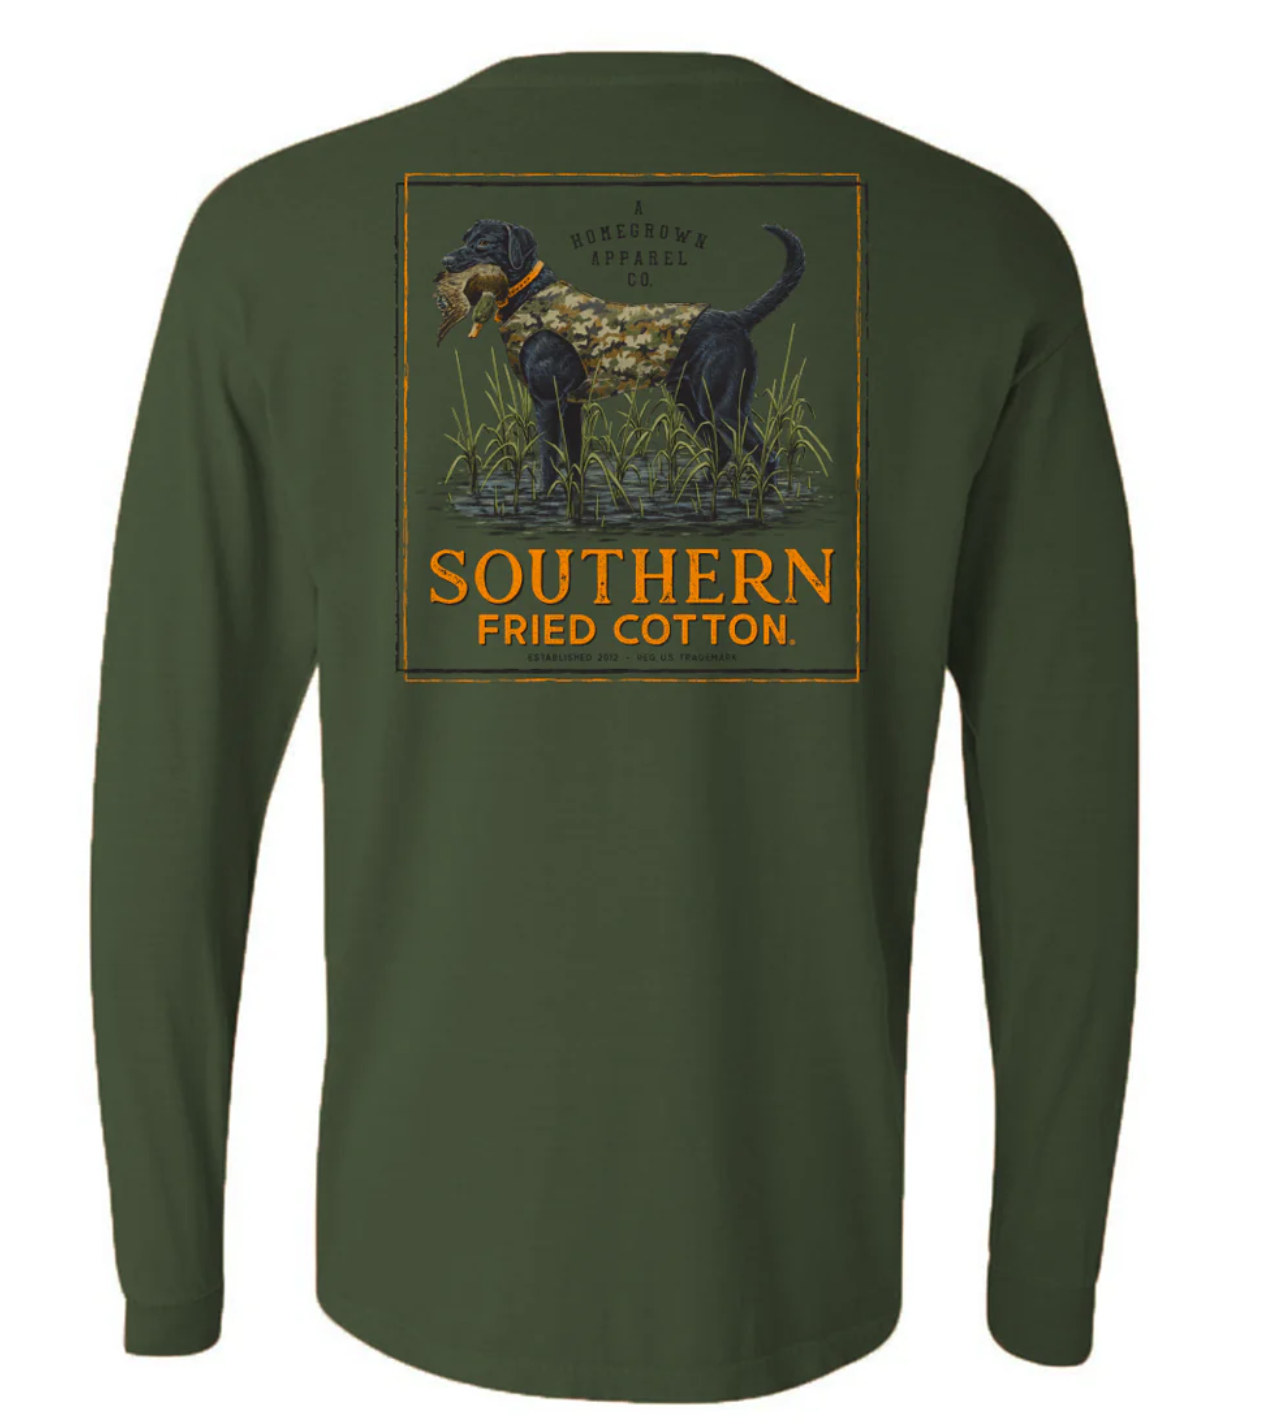 Southern Fried Cotton Dressed to Hunt Long Sleeve T-Shirt